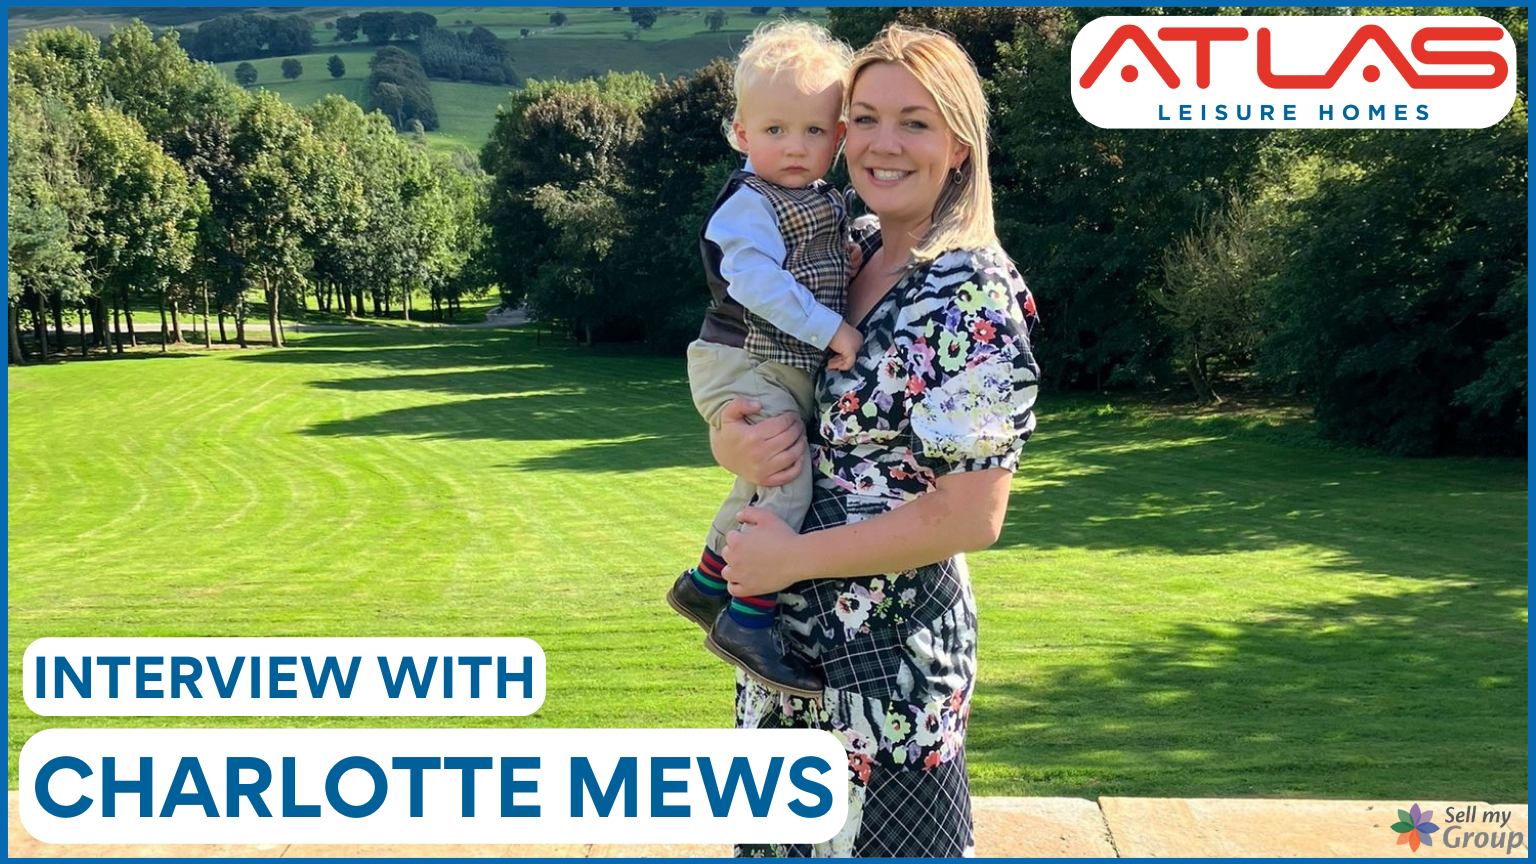 Charlotte Mews,Marketing Manager for Atlas interview